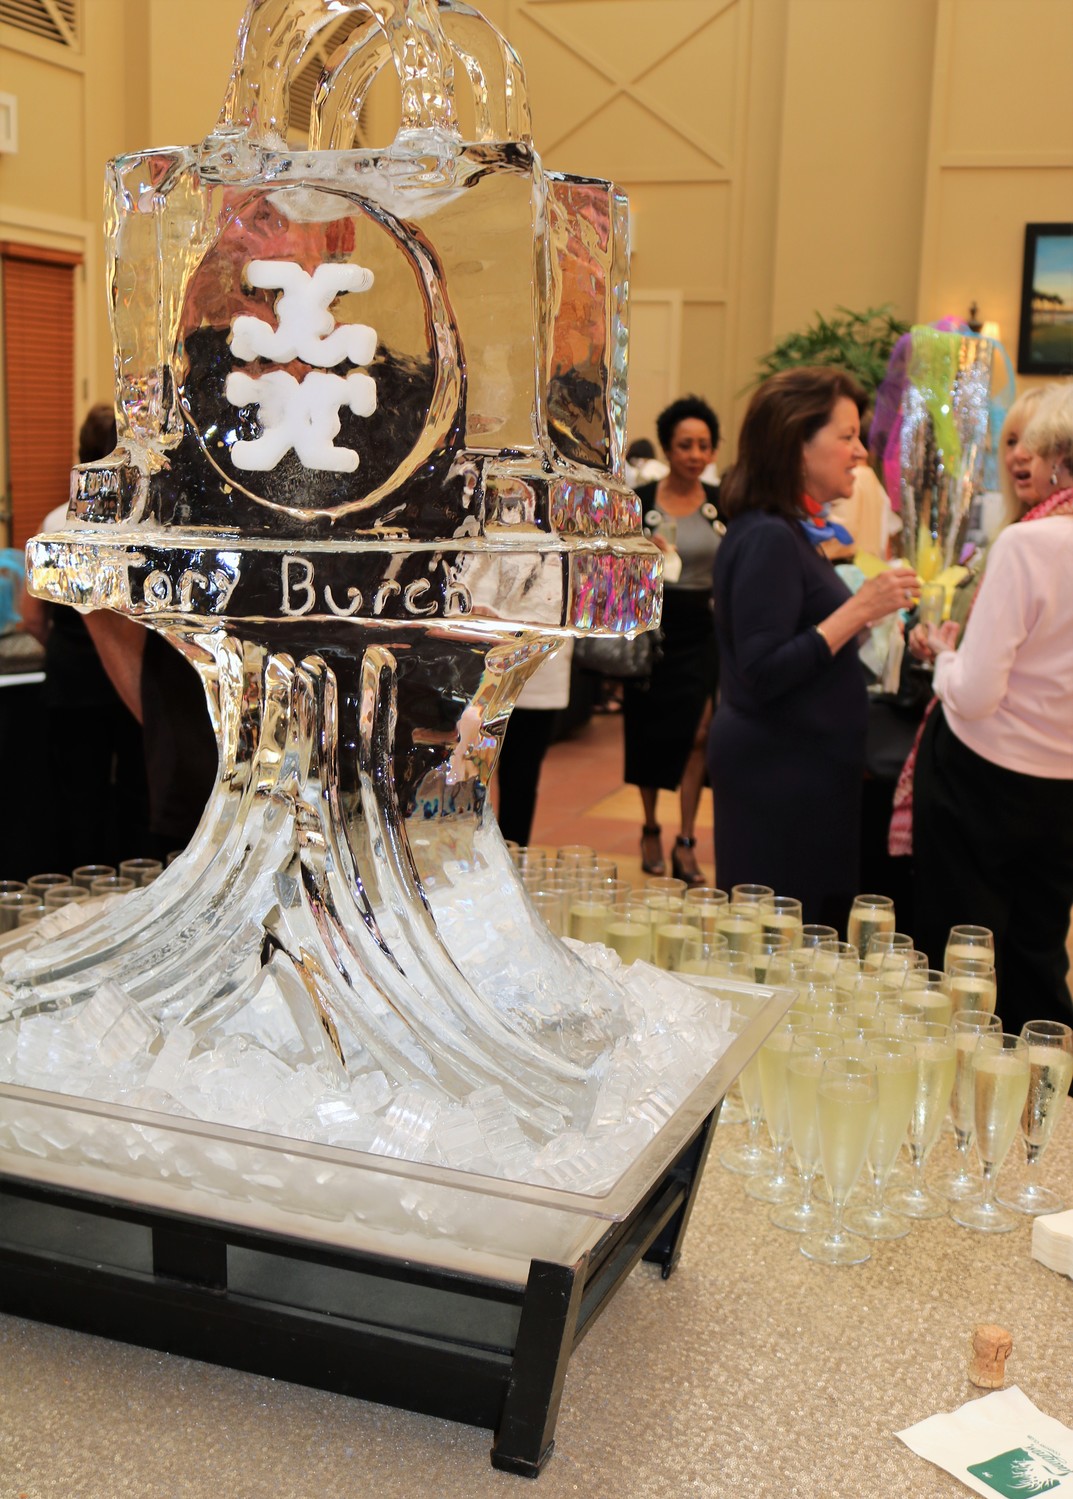 Attendees of the Feb. 21 event had the opportunity to admire an ice sculpture of a Tory Burch purse as they browsed and placed their bids.